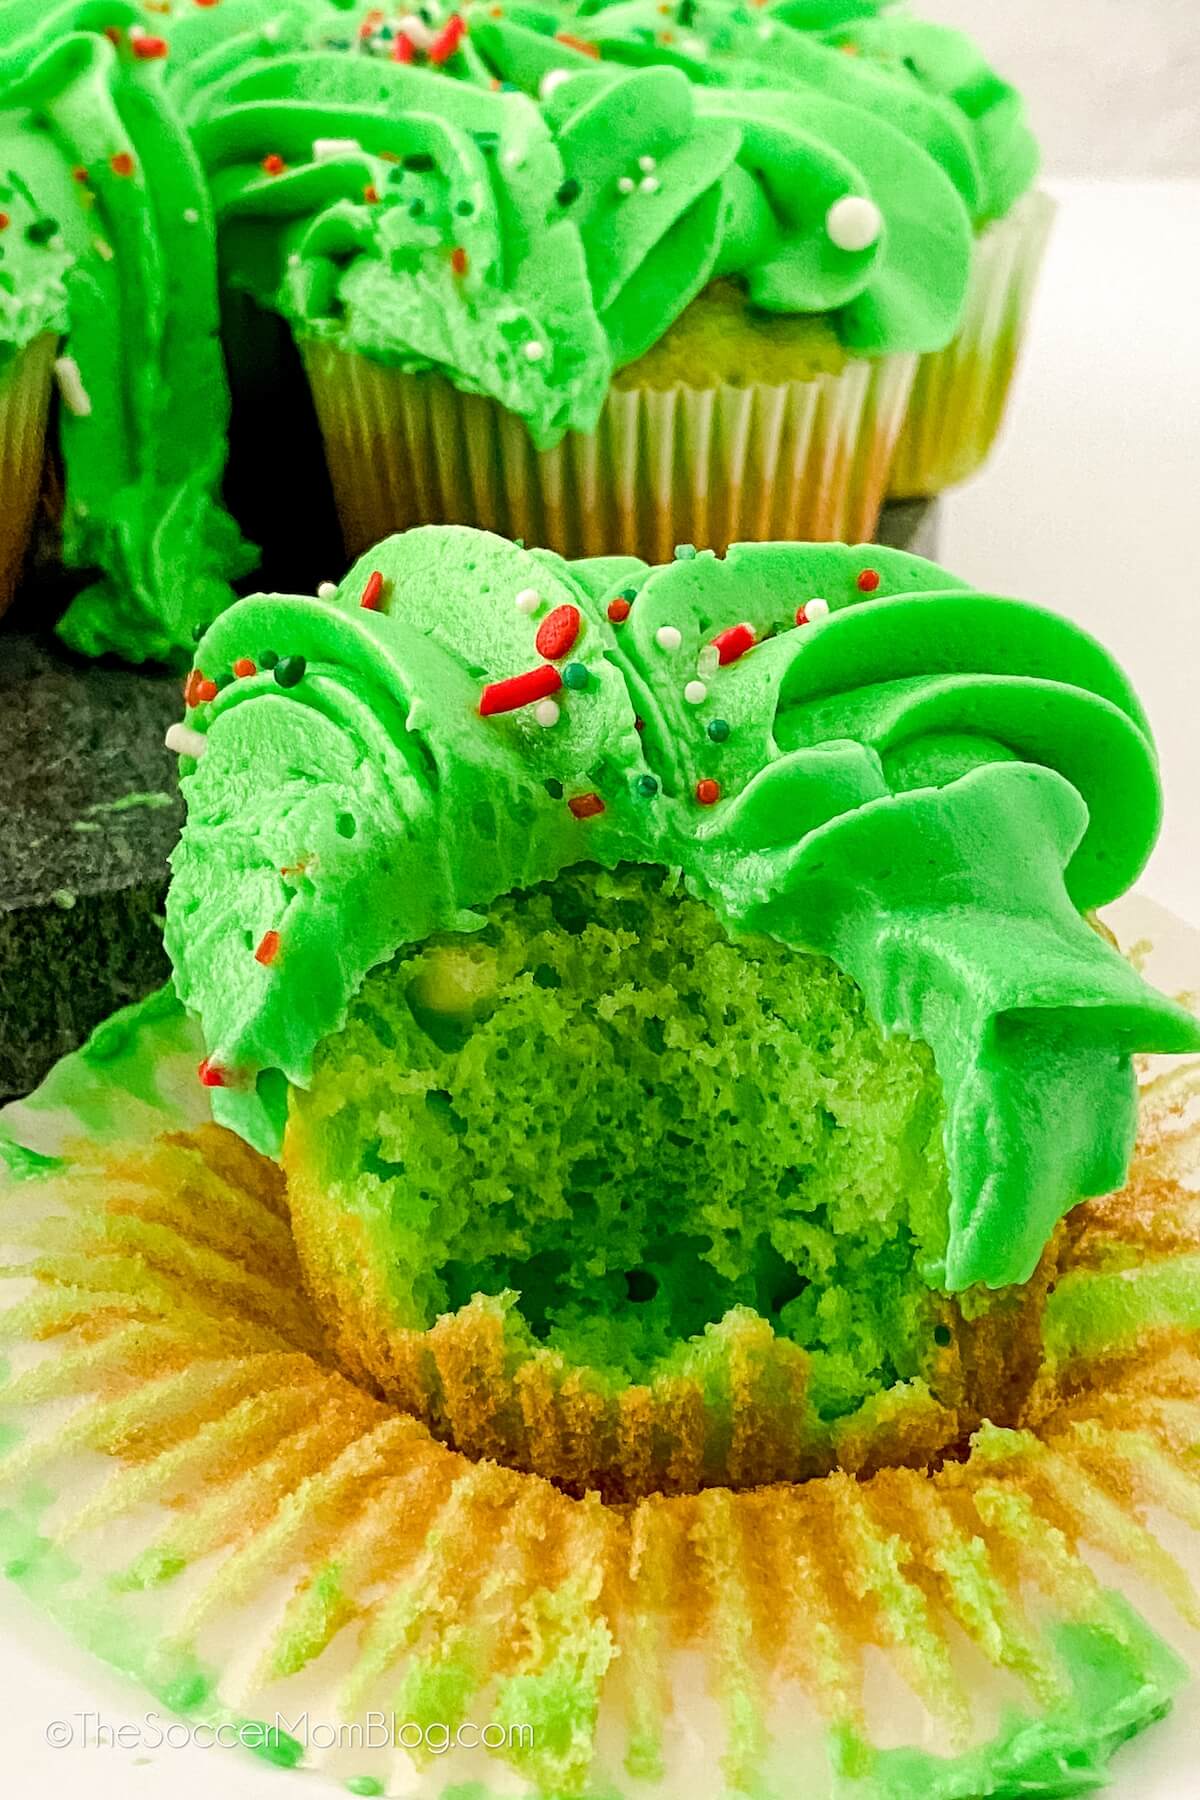 green cupcake with green frosting, with a bite taken.